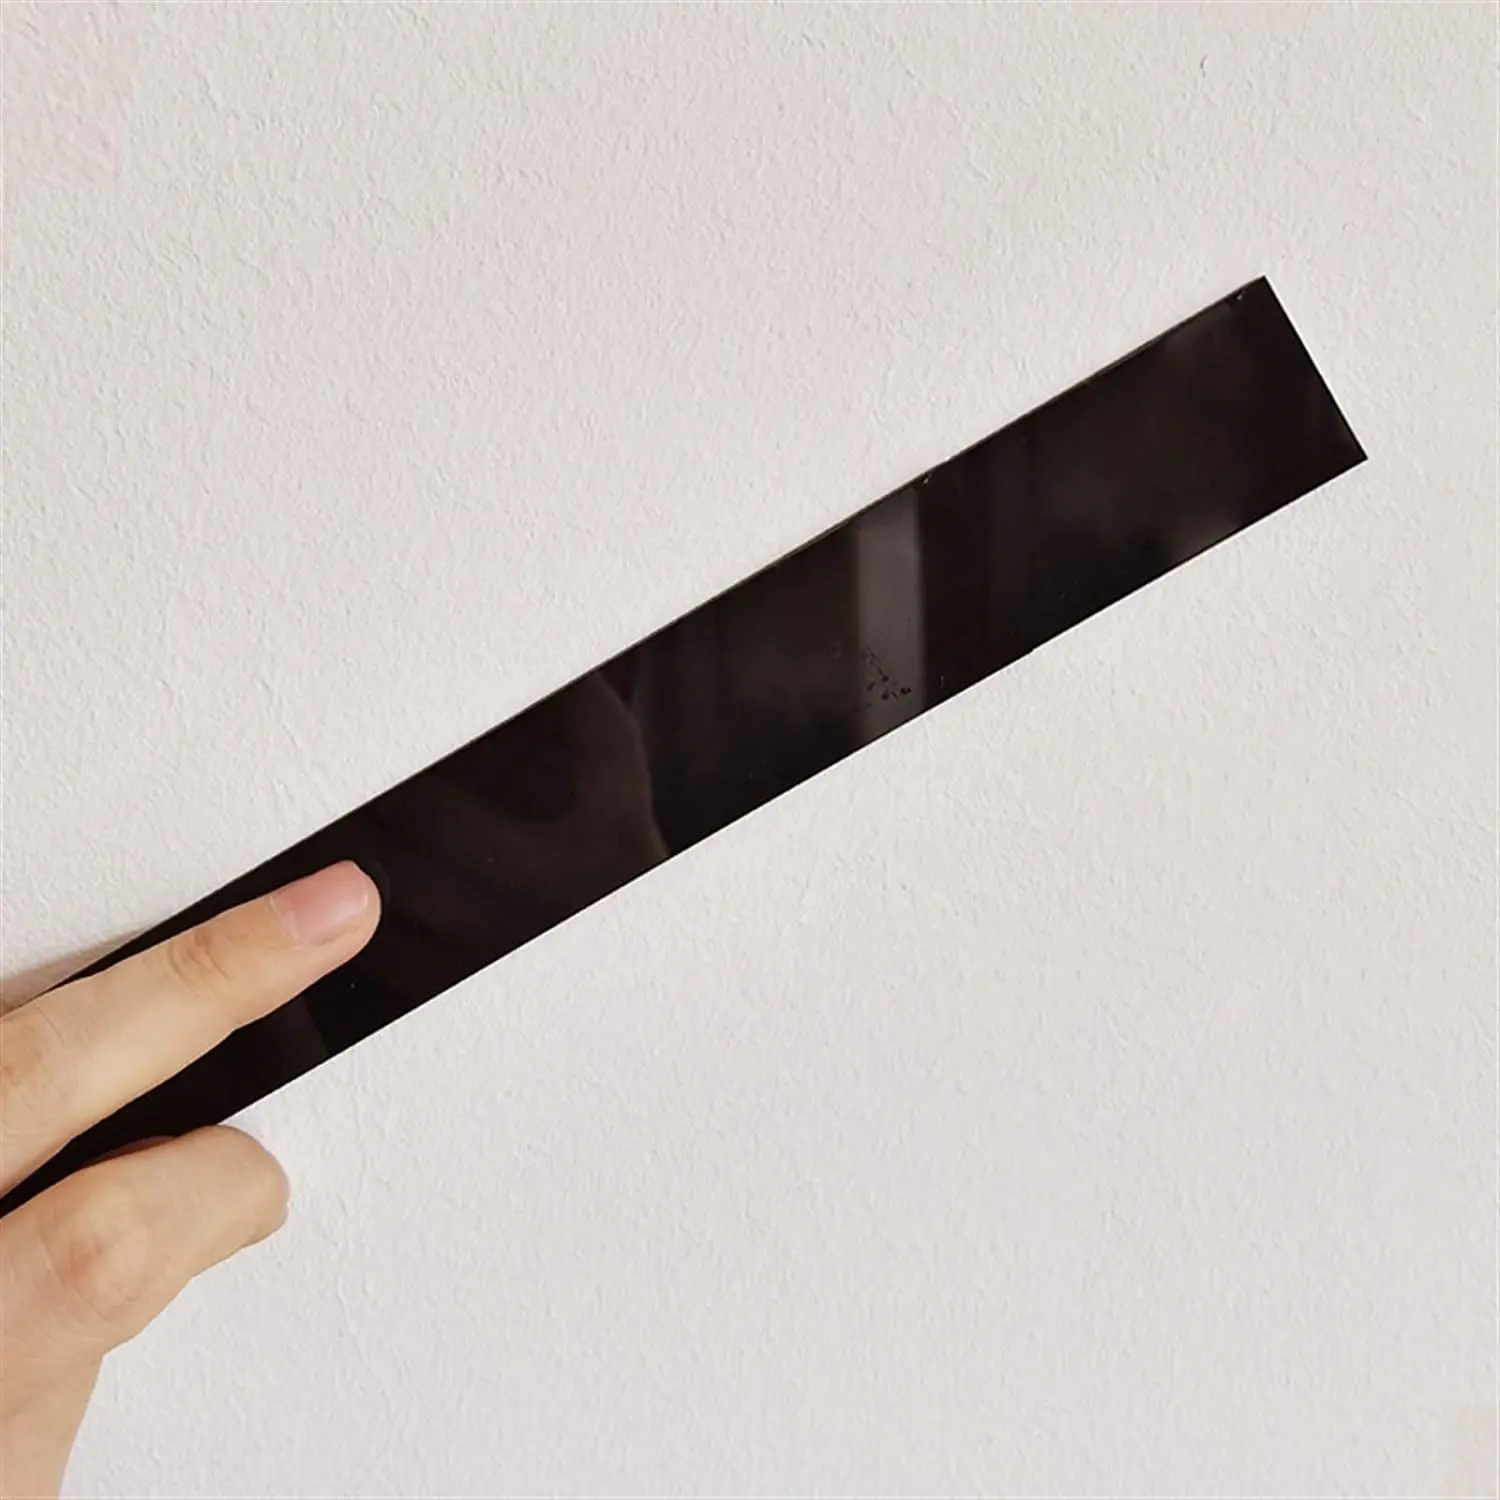 Wall Molding Trim Black Metalized Mirror-Like Finish, Peel and Stick Design for Wall Frames/Waist Lines